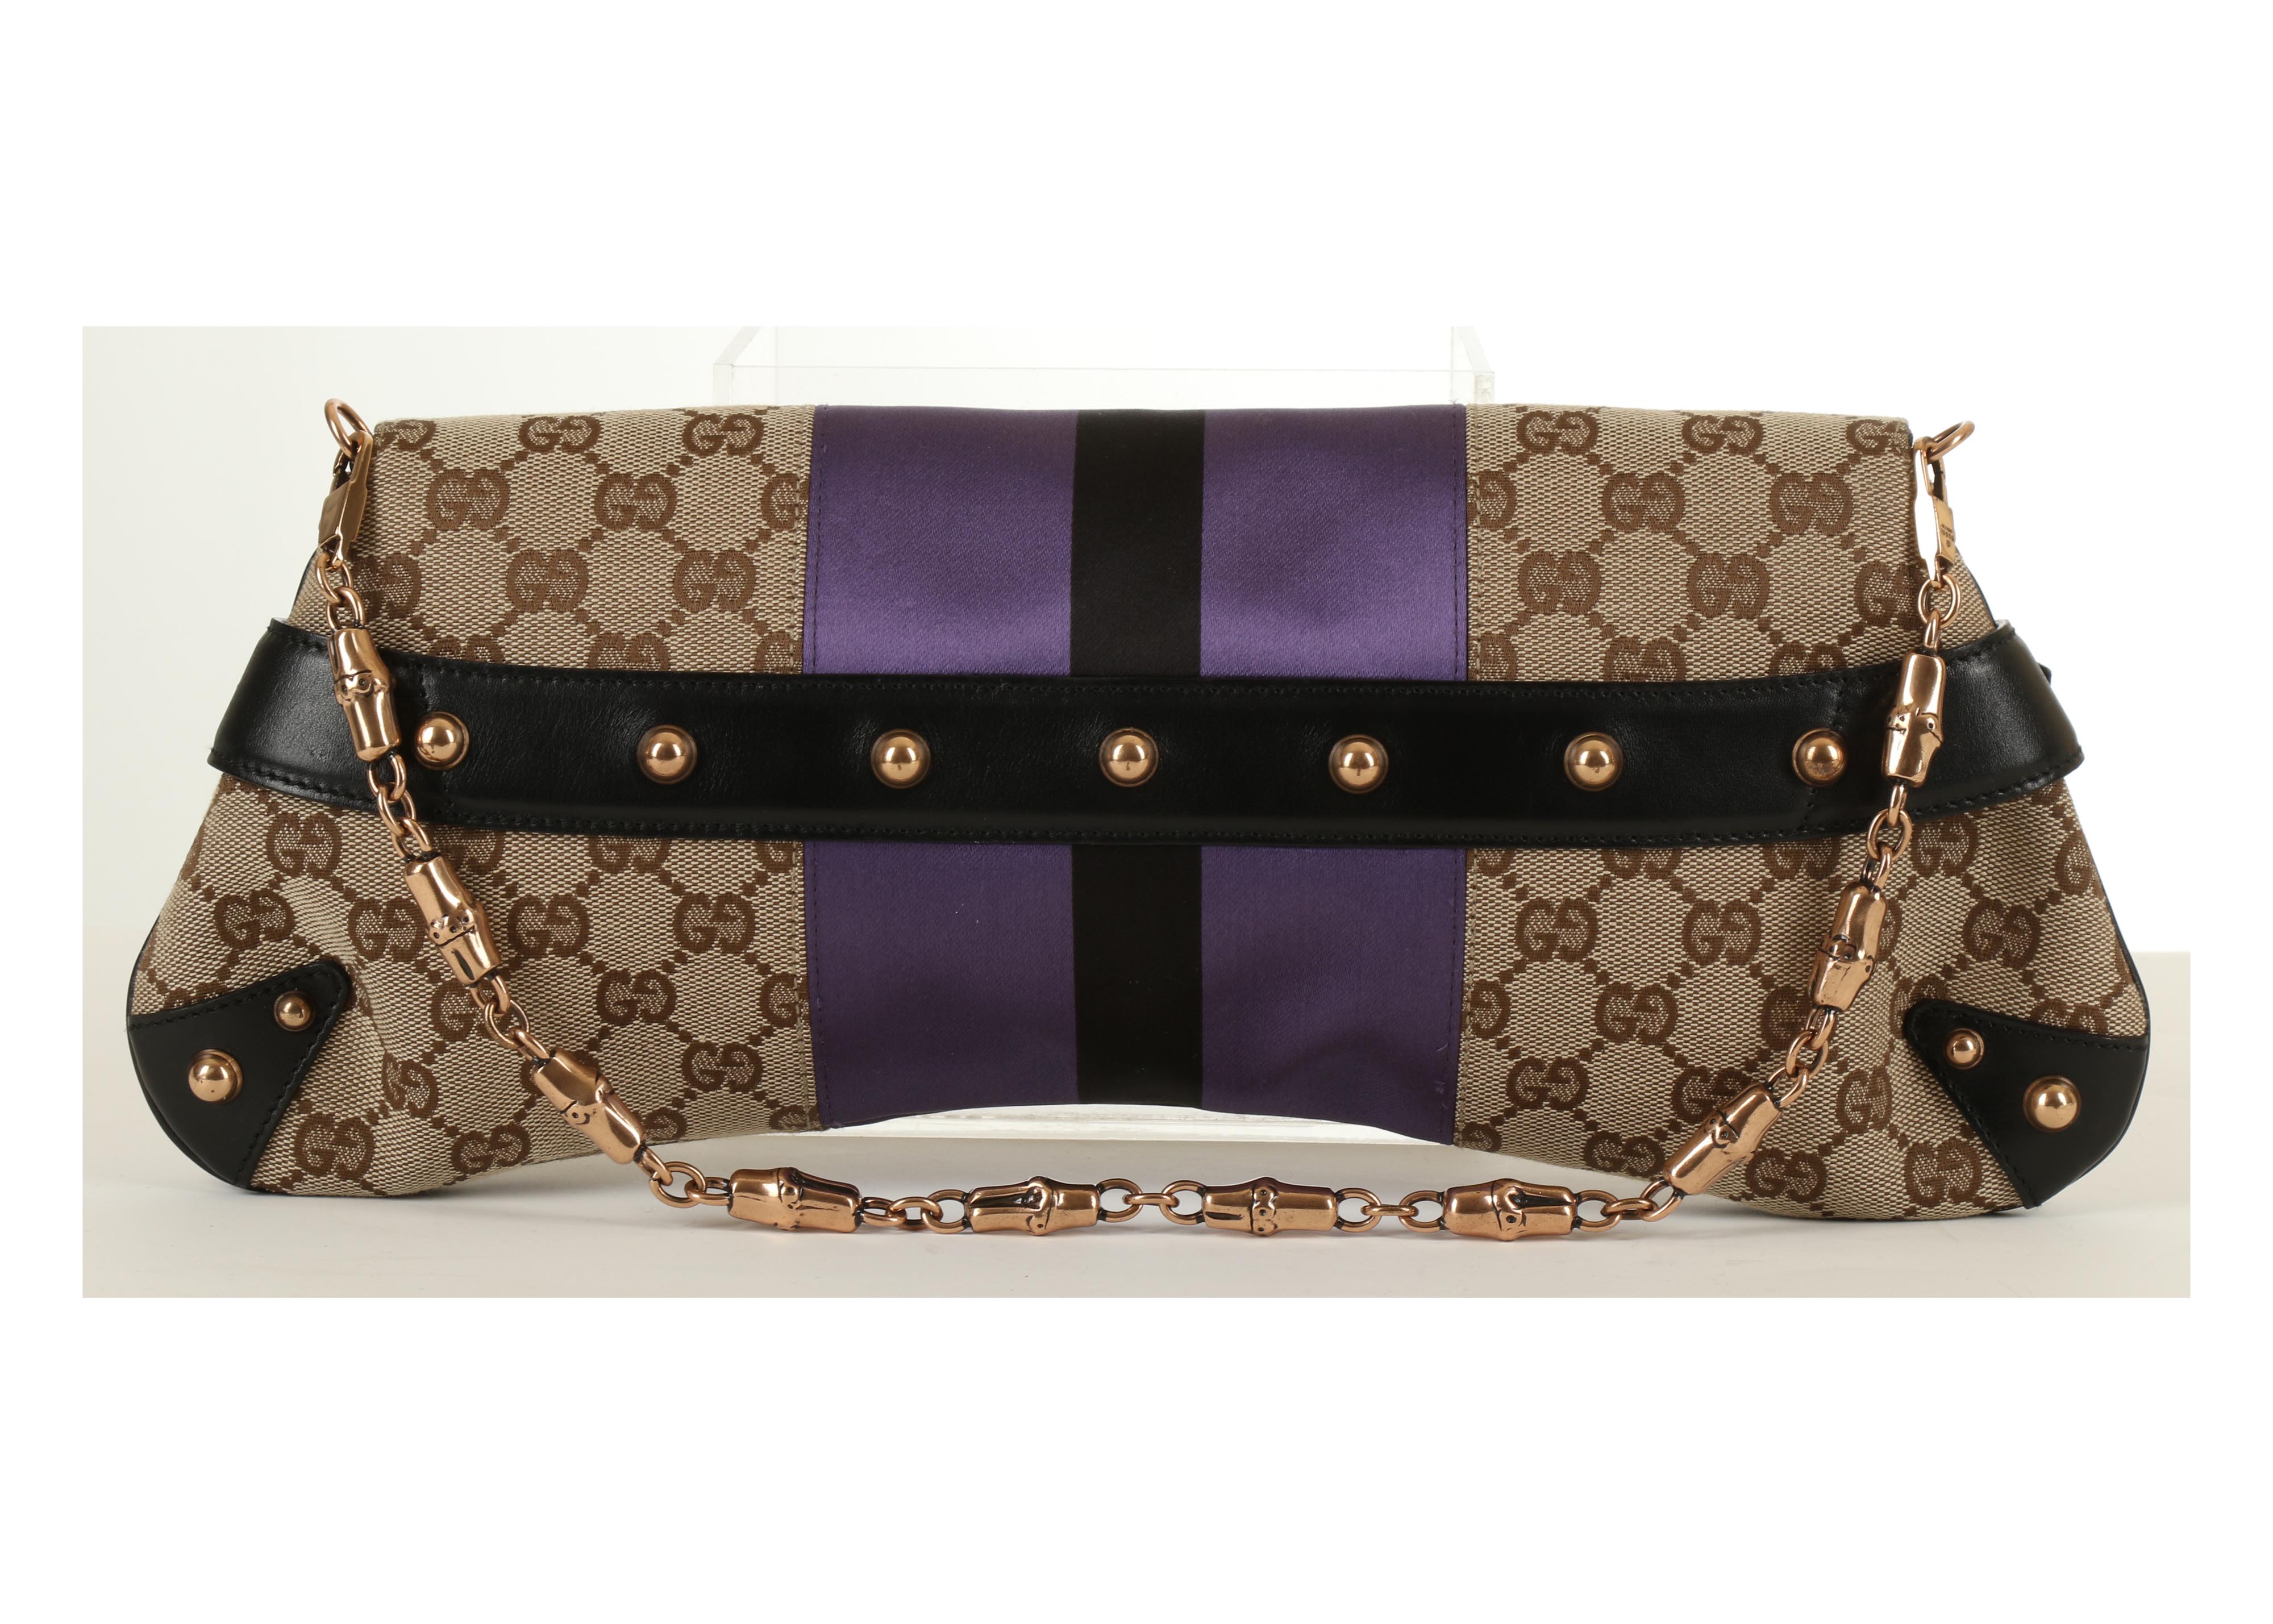 Sold at Auction: A GUCCI X TOM FORD HORSEBIT CLUTCH BAG